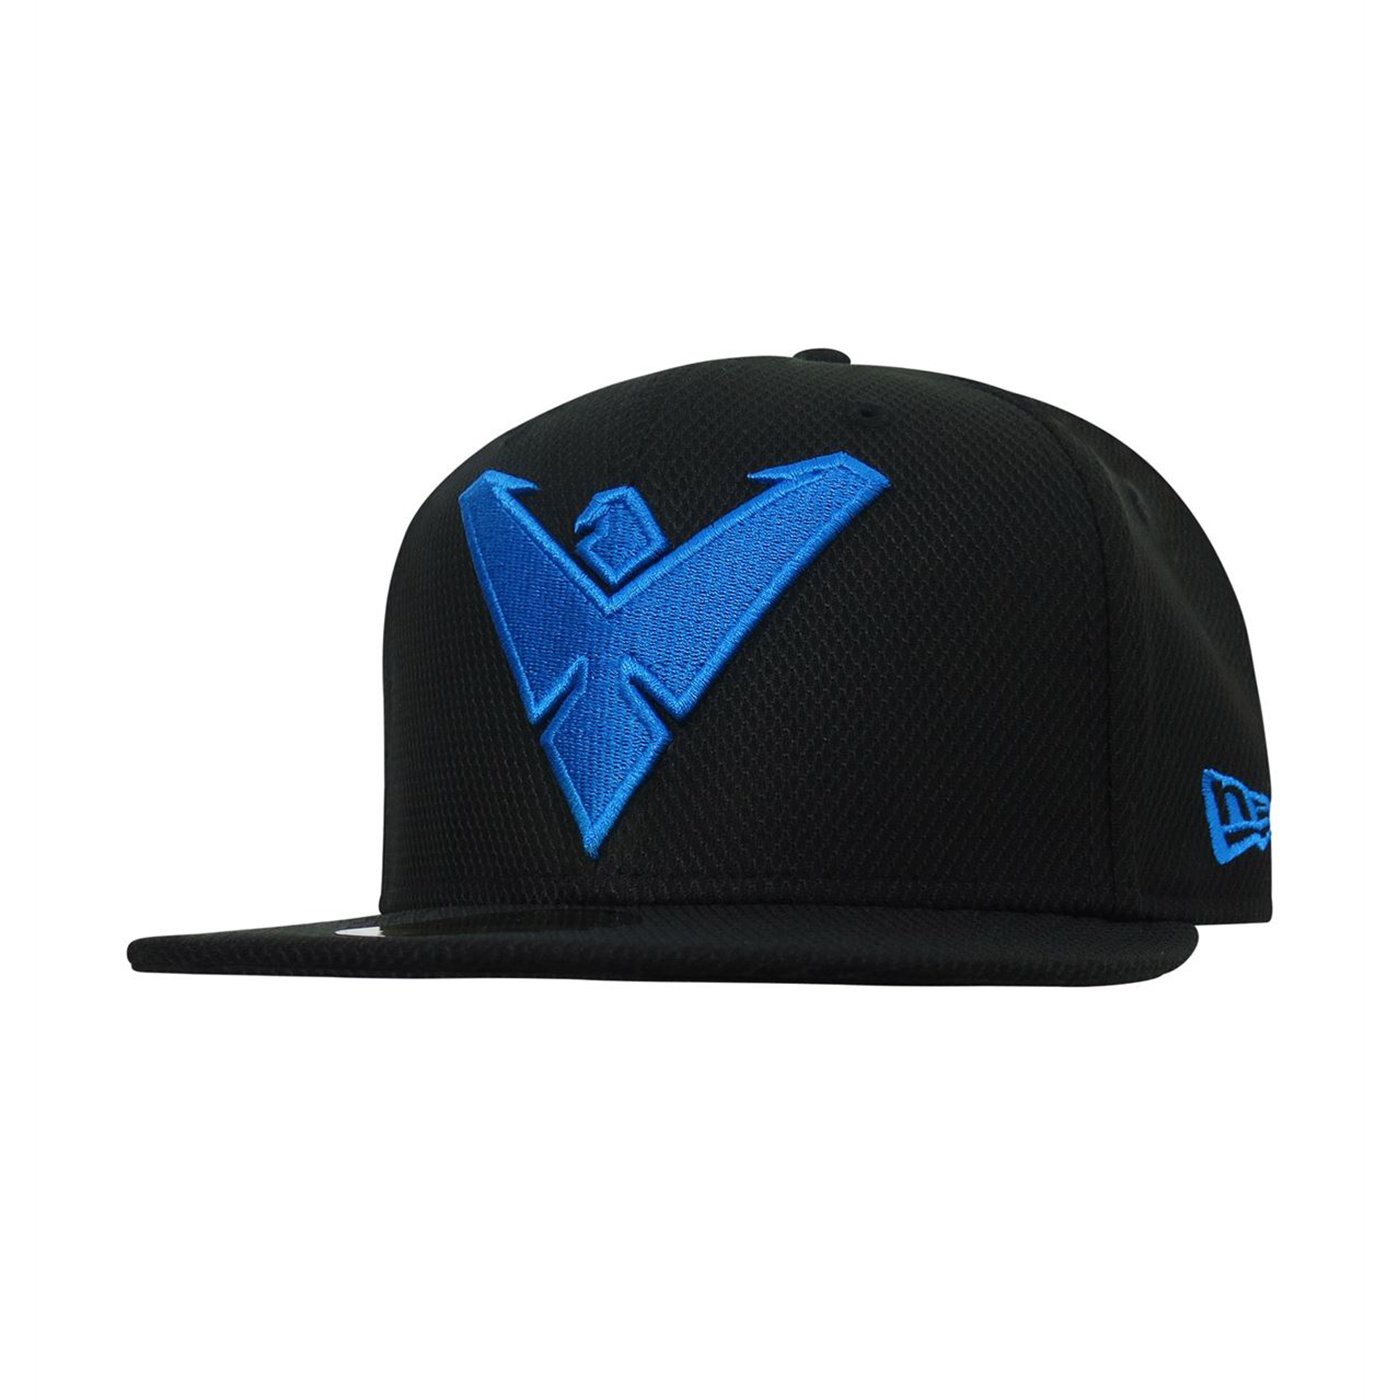 Nightwing Symbol 59Fifty Black Fitted Hat